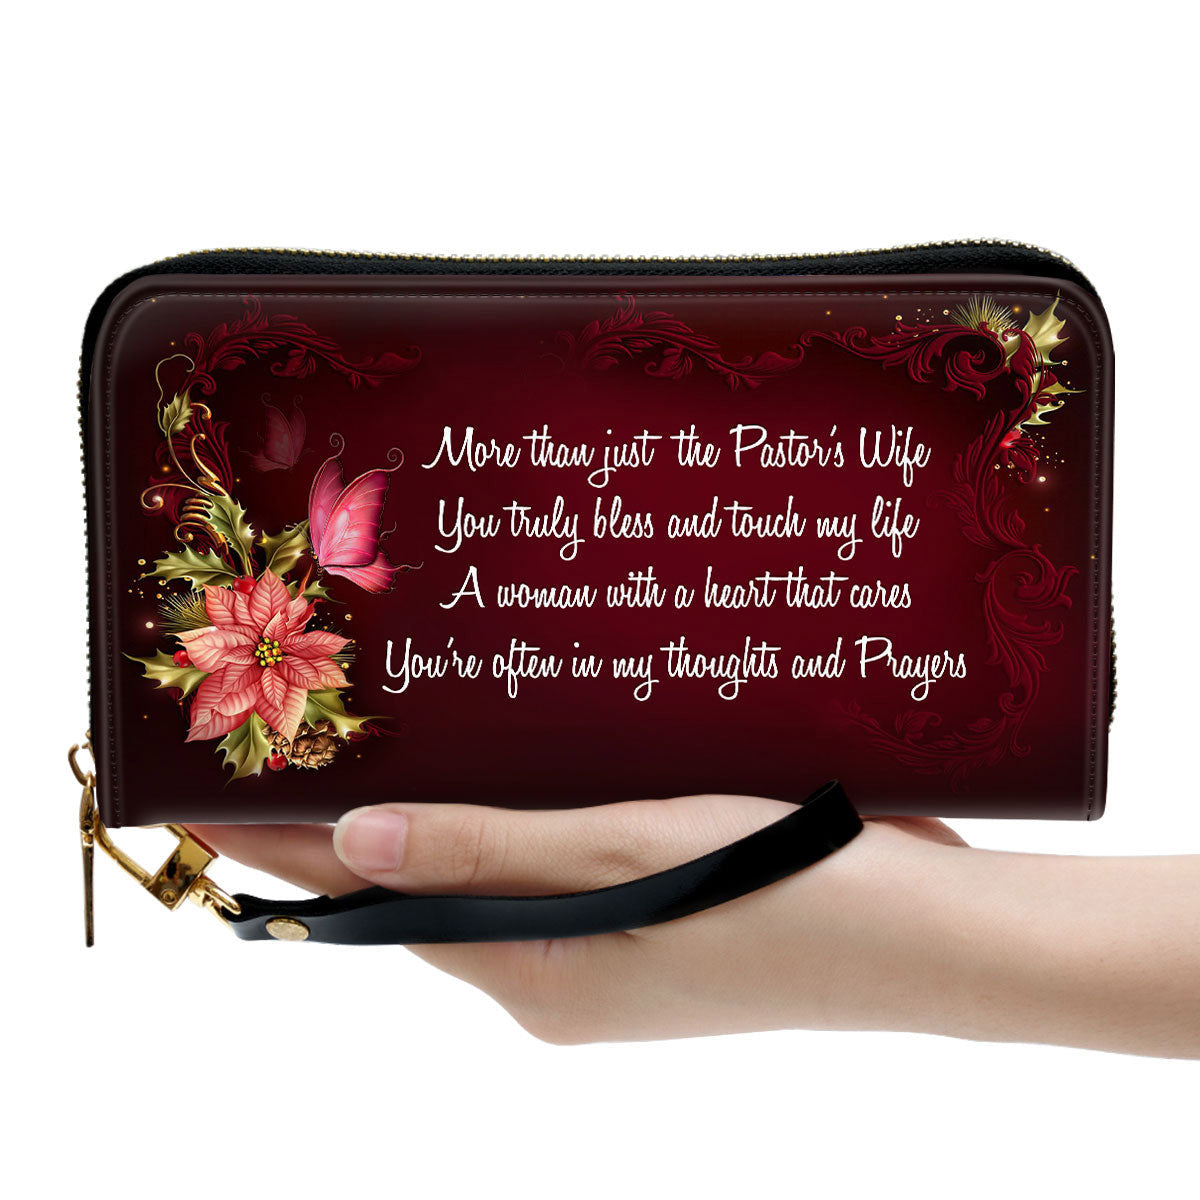 A Woman With A Heart That Cares Gift For Pastors's Wife Butterfly And Flower Clutch Purse For Women - Personalized Name - Christian Gifts For Women